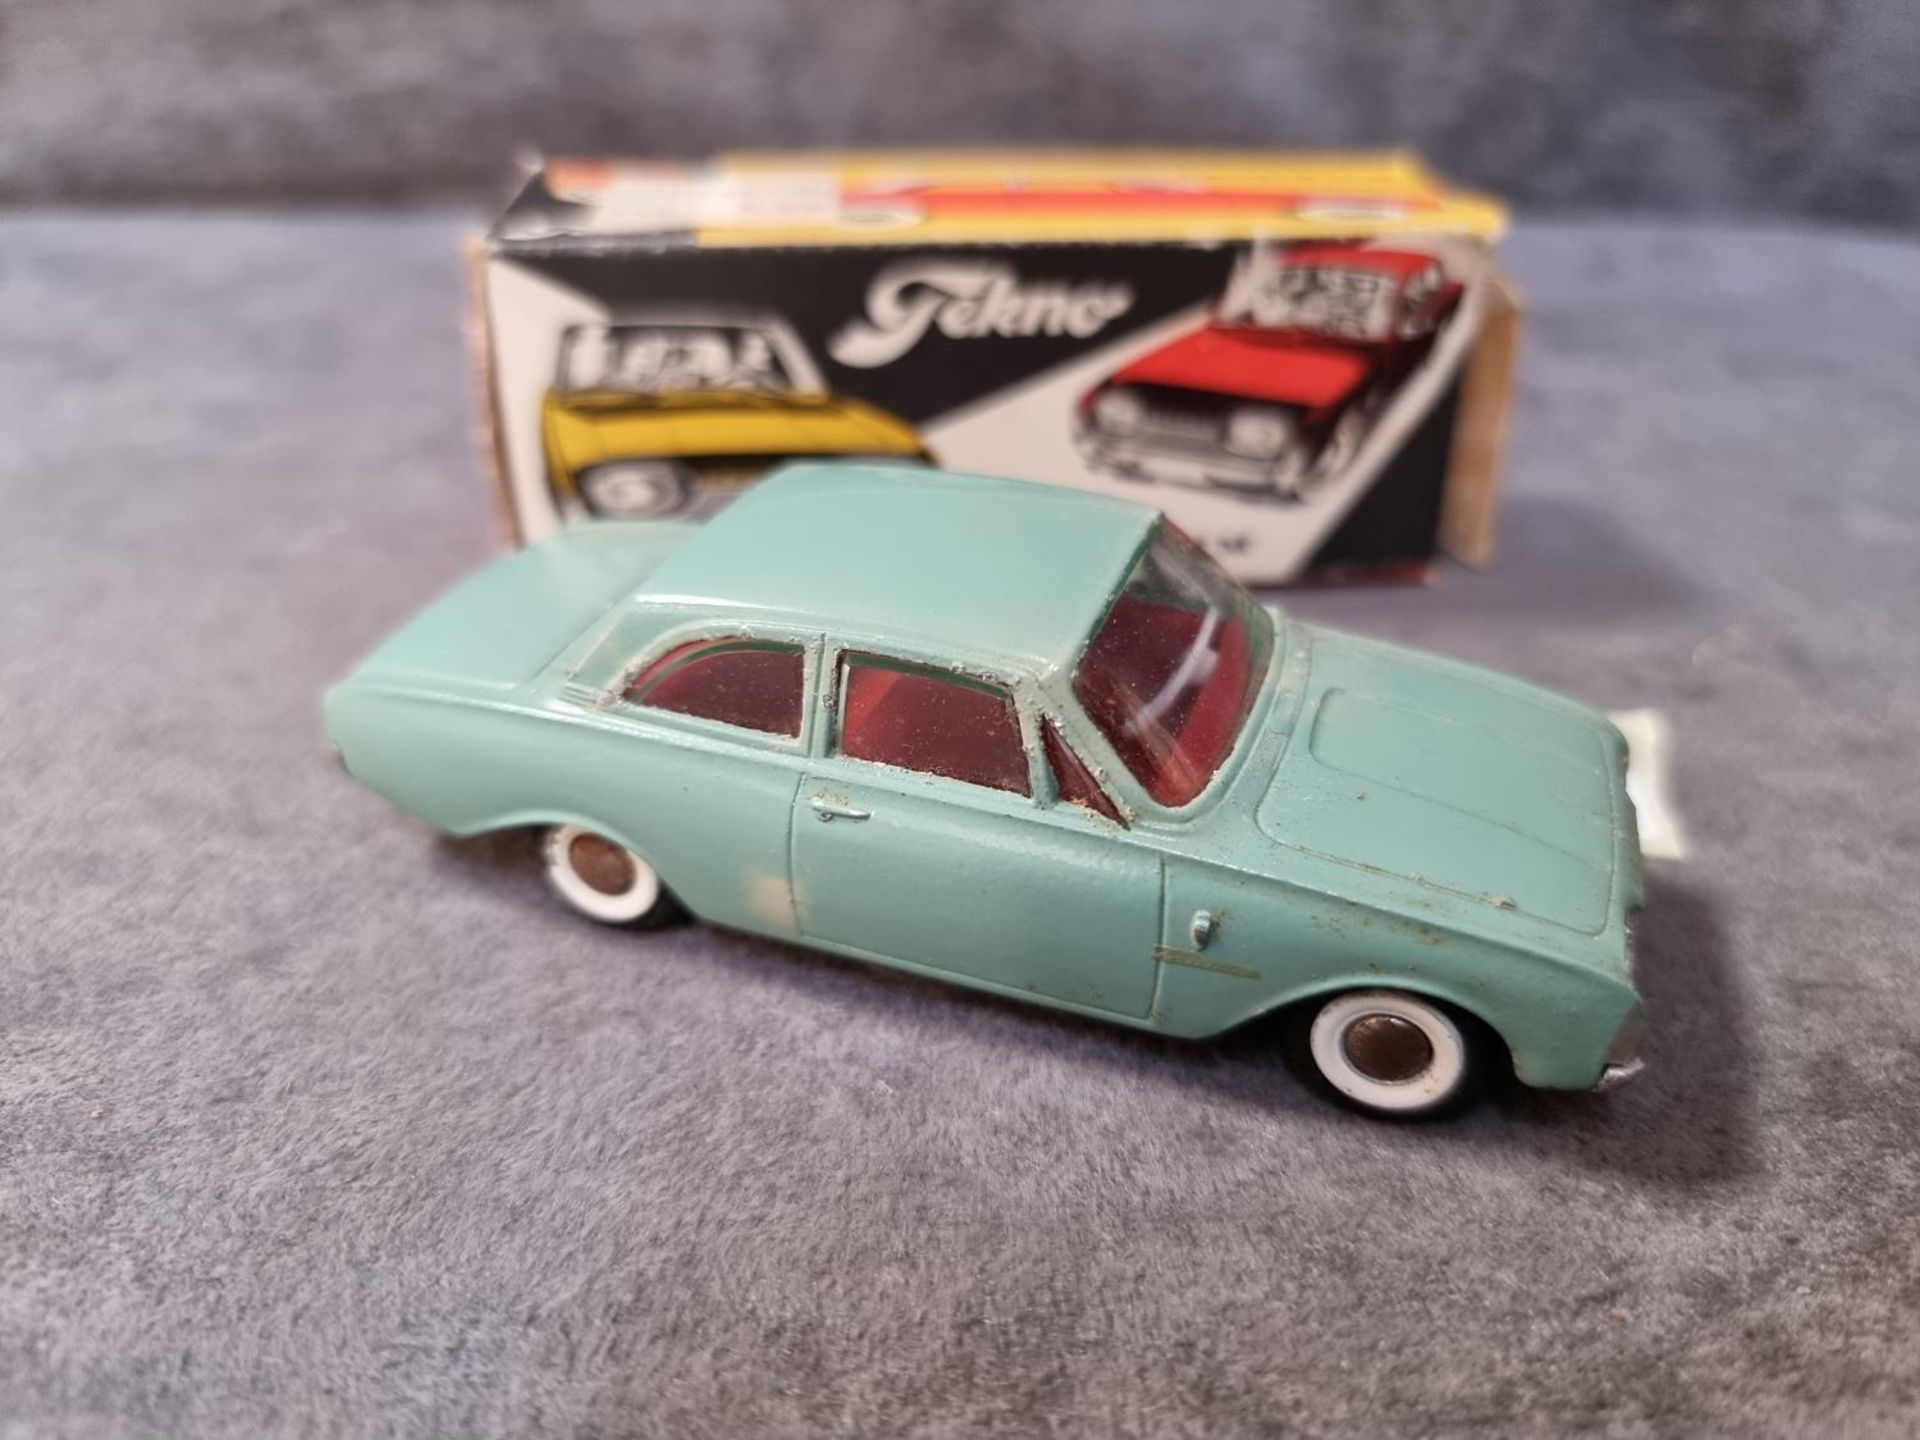 Tekno Diecast #826 Taurus 17M In Blue With A Red Interior Excellent Model With Firm Box Made In